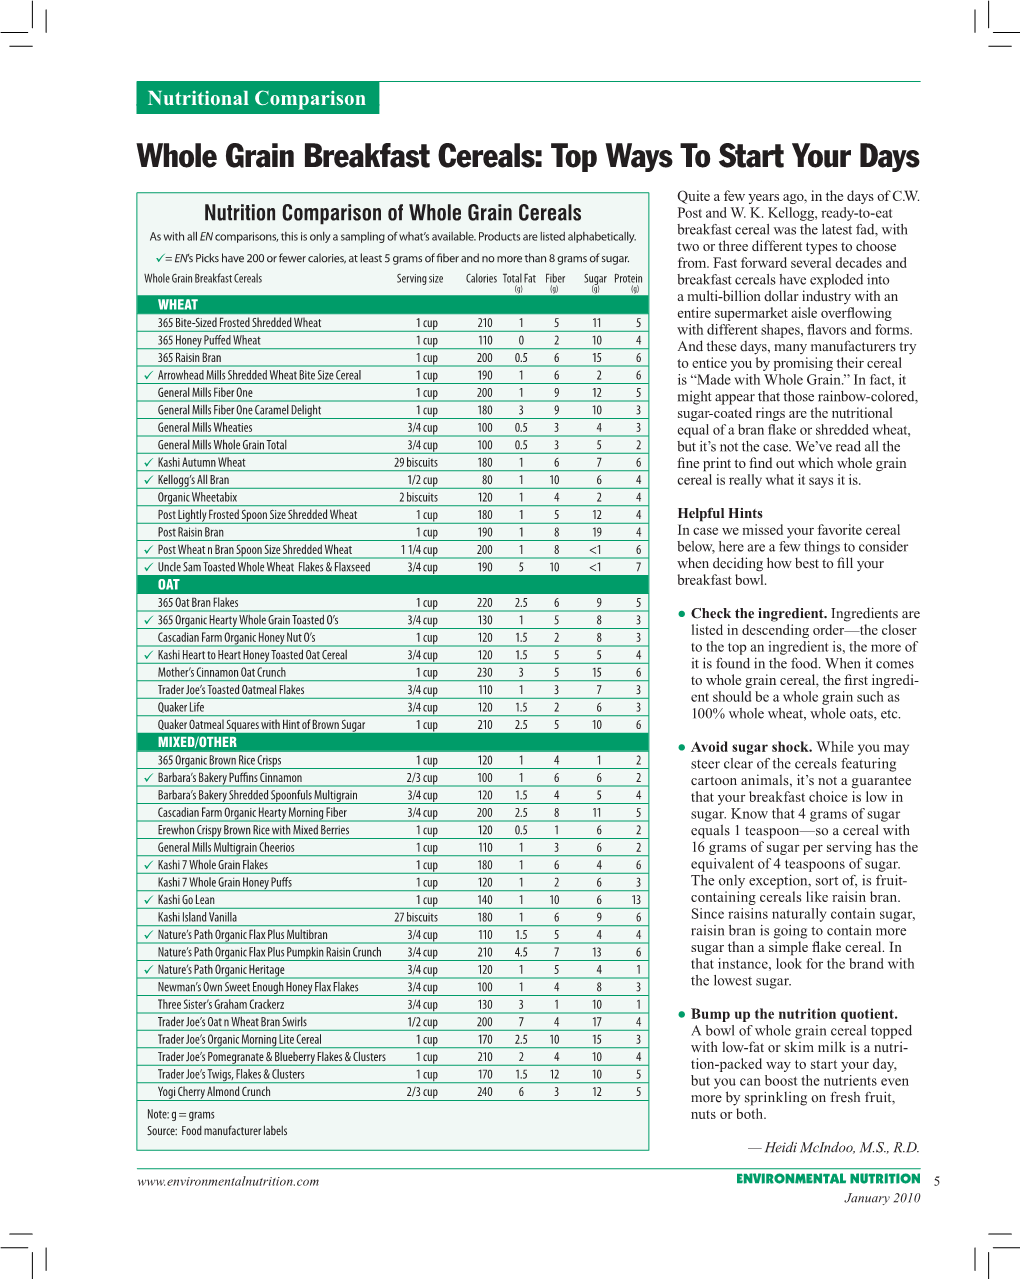 Whole Grain Breakfast Cereals: Top Ways to Start Your Days